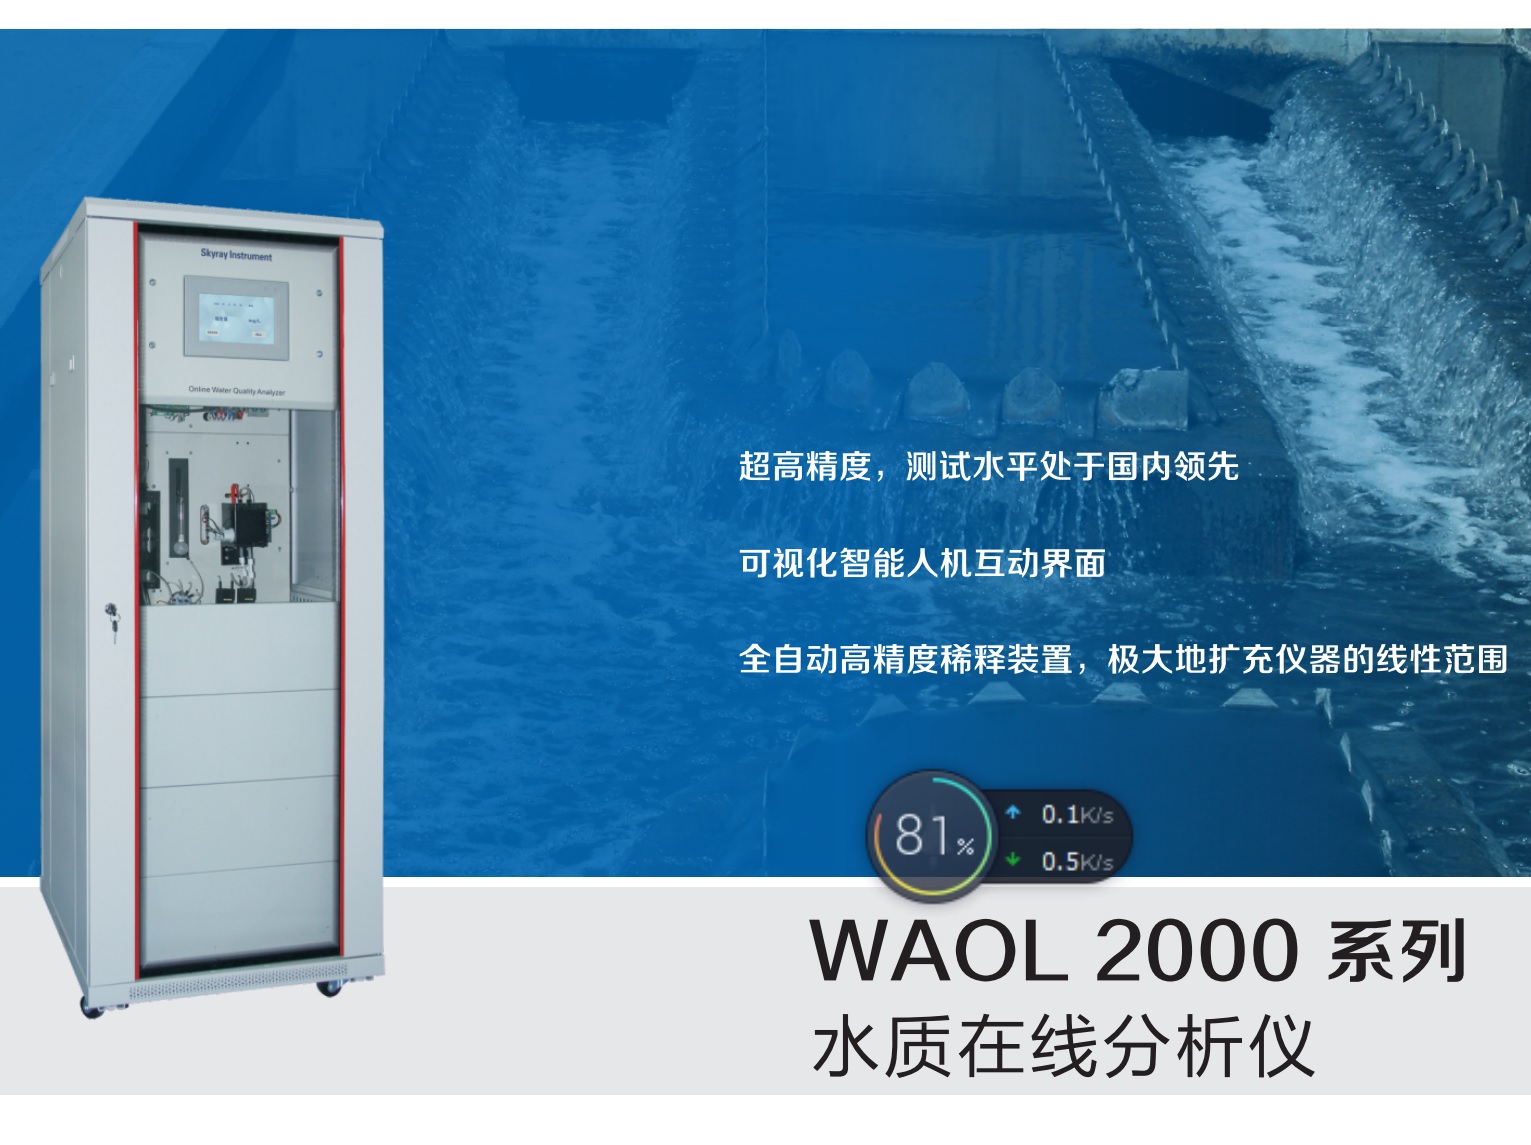 WAOL 2000 On line analysis of water quality